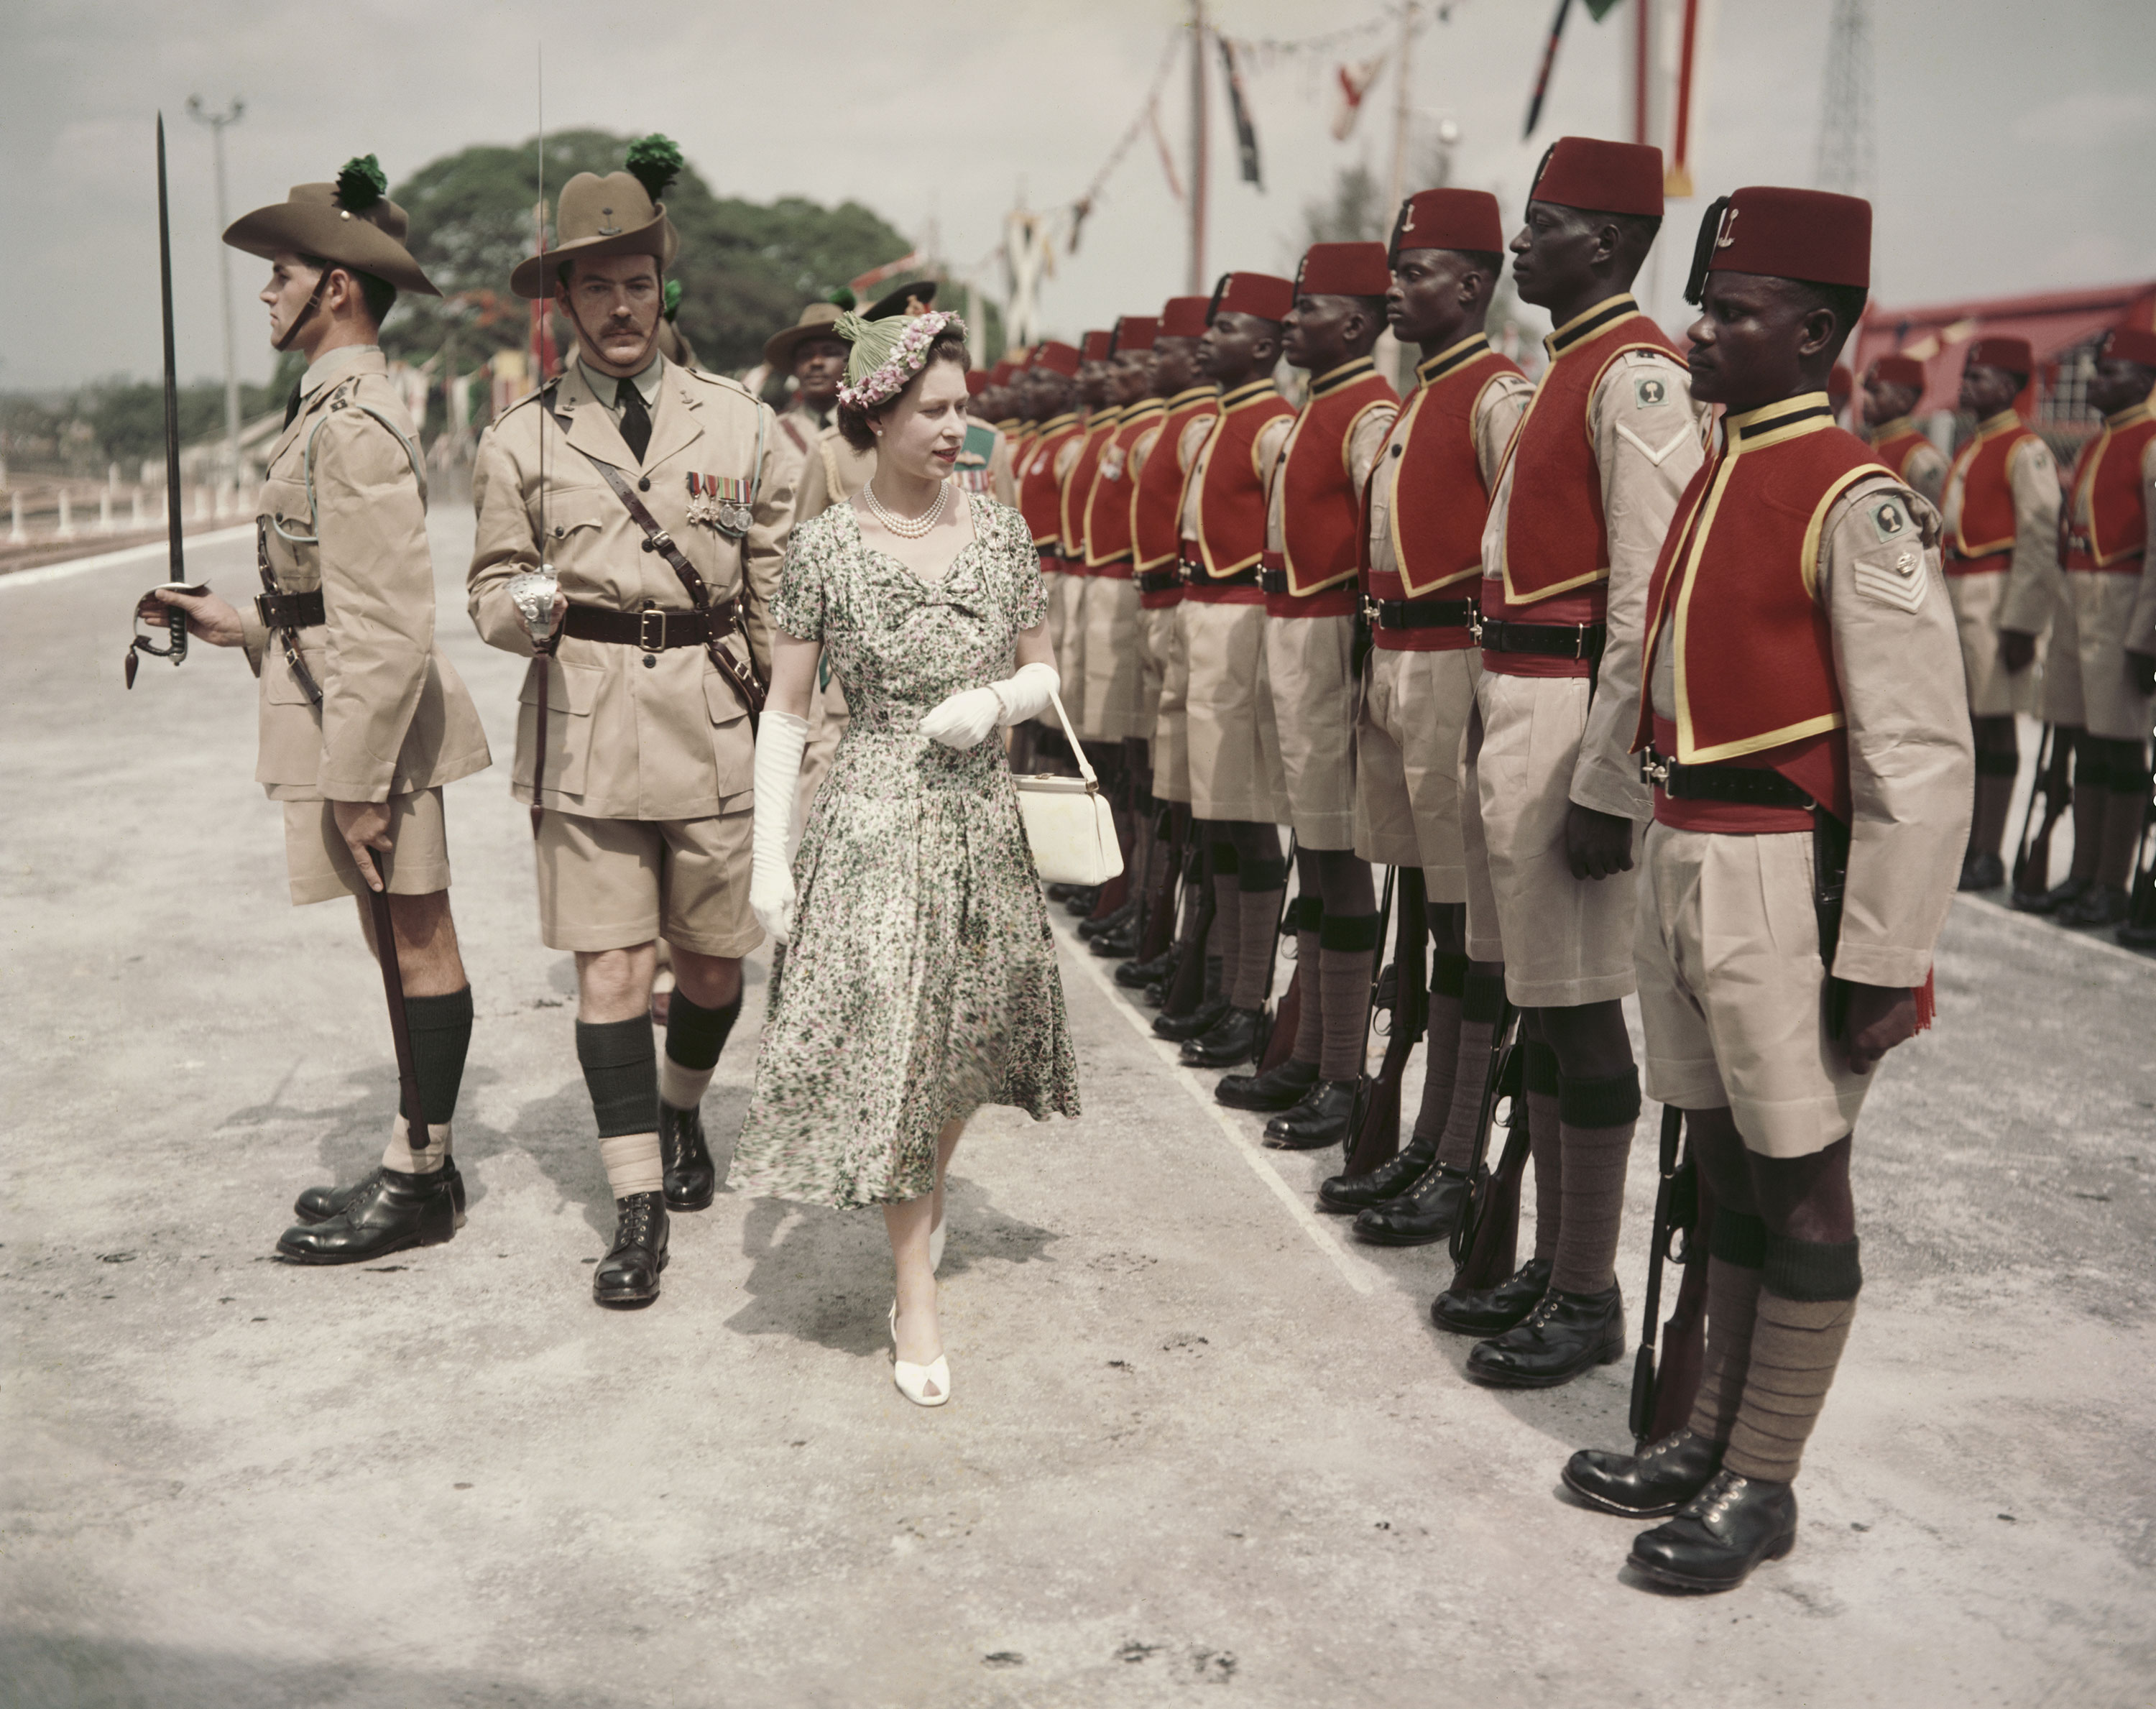 Queen Elizabeth inspects men of the Queen's Own Nigeria Regiment, Royal West African Frontier Force, at Kaduna Airport in Nigeria during her Commonwealth tour in 1956.